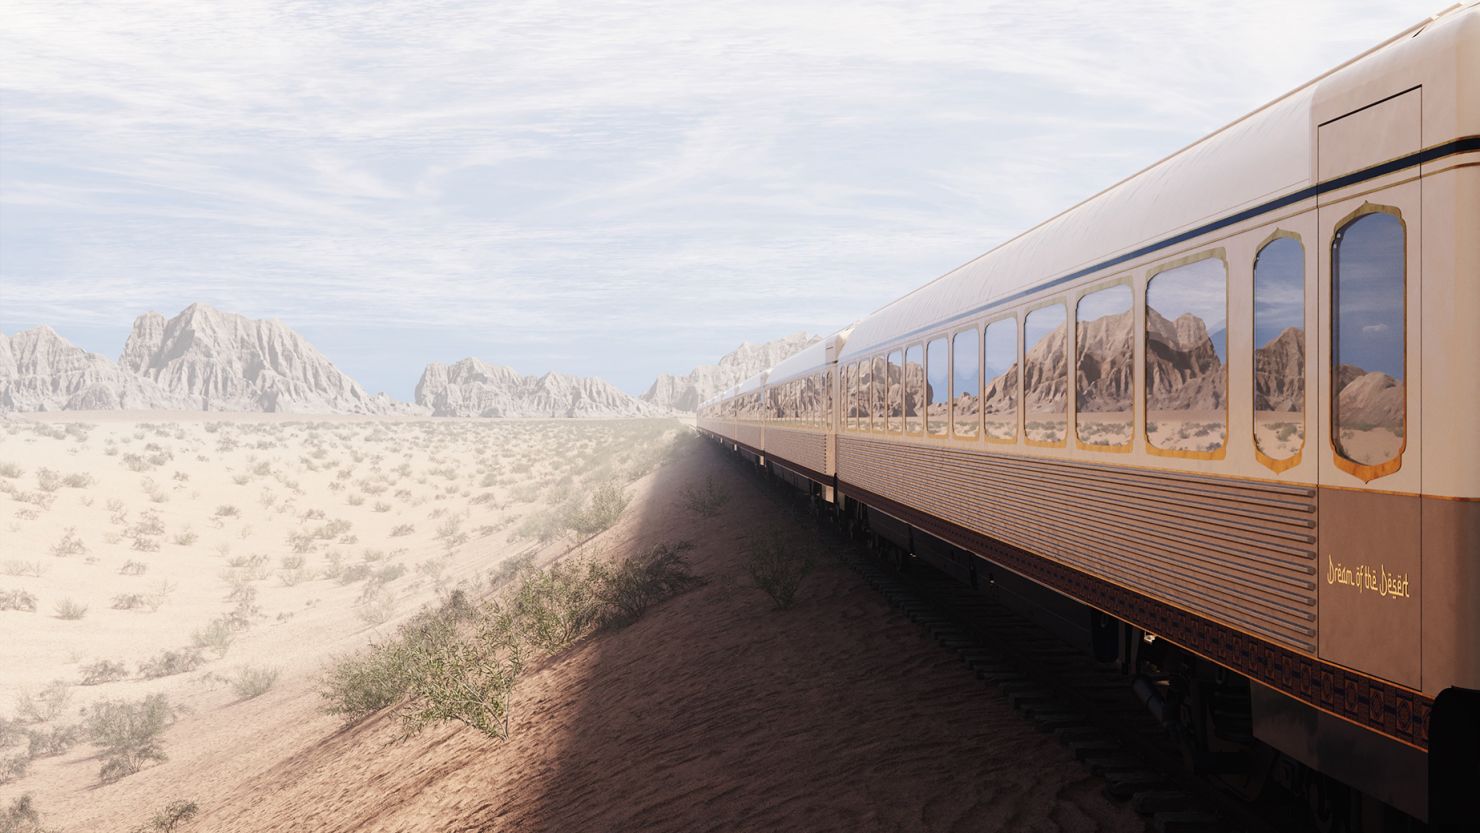 A rendering of luxury train Dream of the Desert, which is due to launch in Saudi Arabia in 2025.